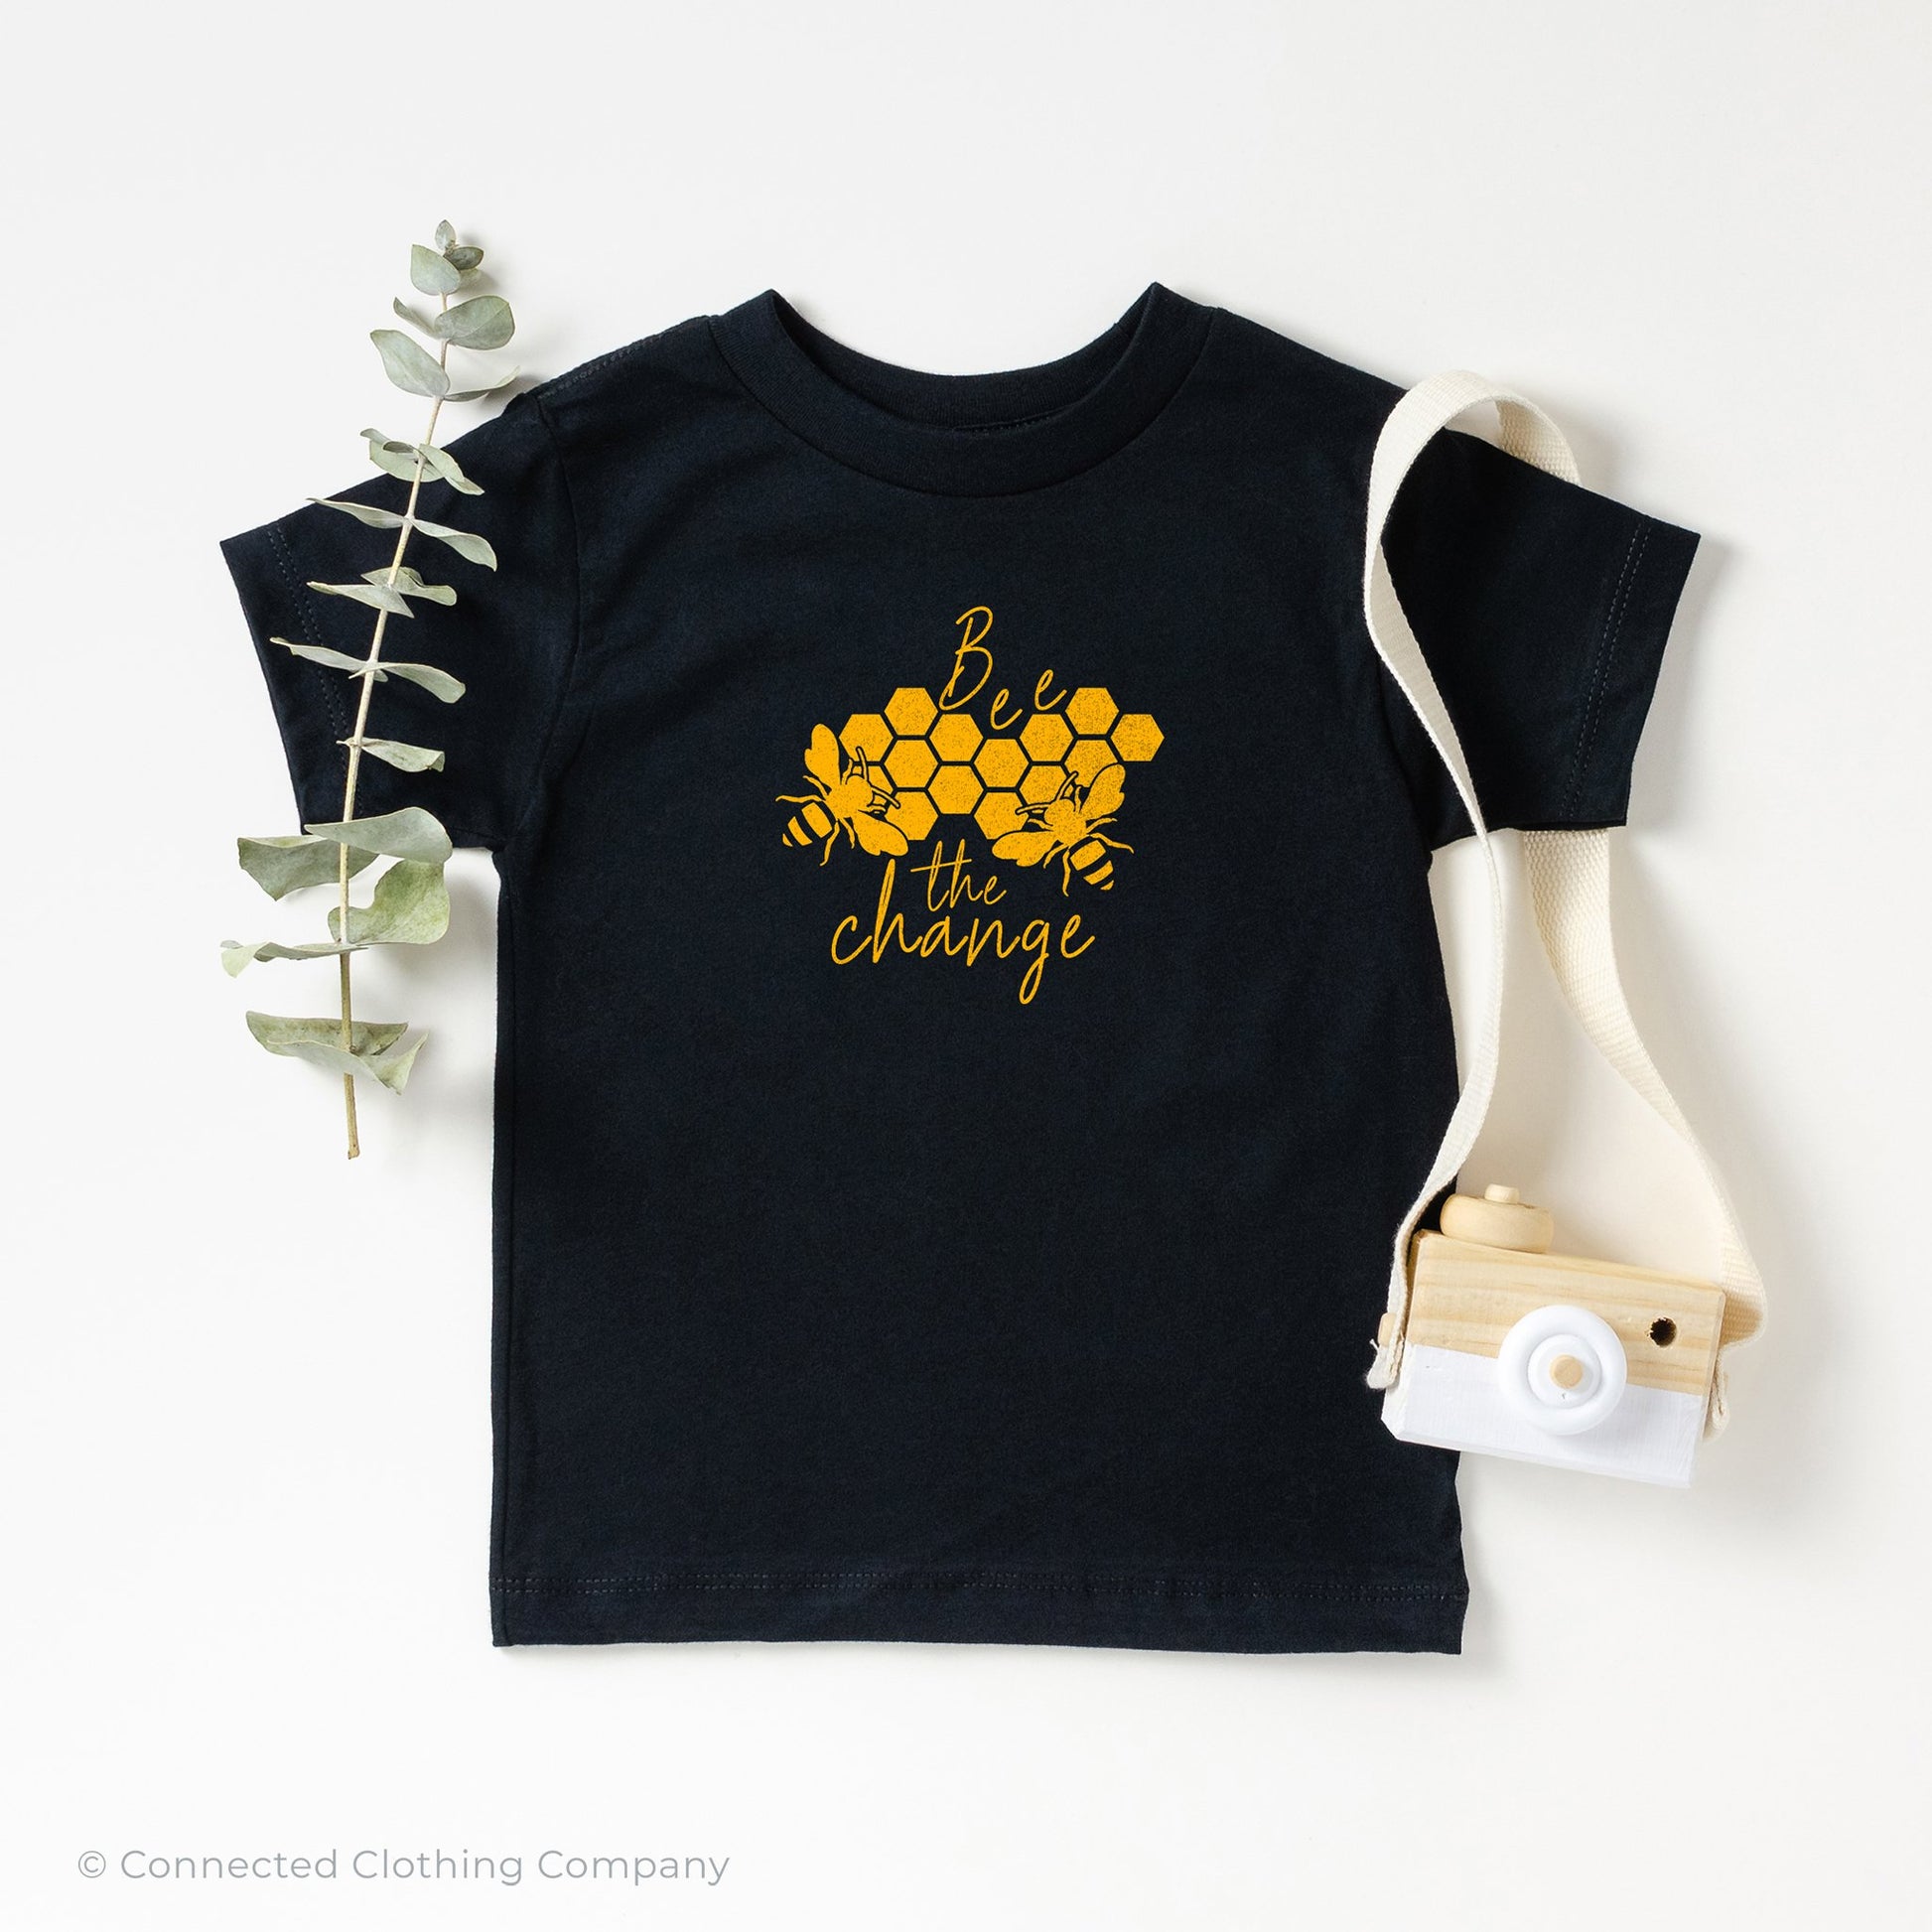 Bee The Change Toddler Short-Sleeve Tee in Black - sweetsherriloudesigns - 10% of profits donated to The Honeybee Conservancy, supporting bee conservation and building bee habitats